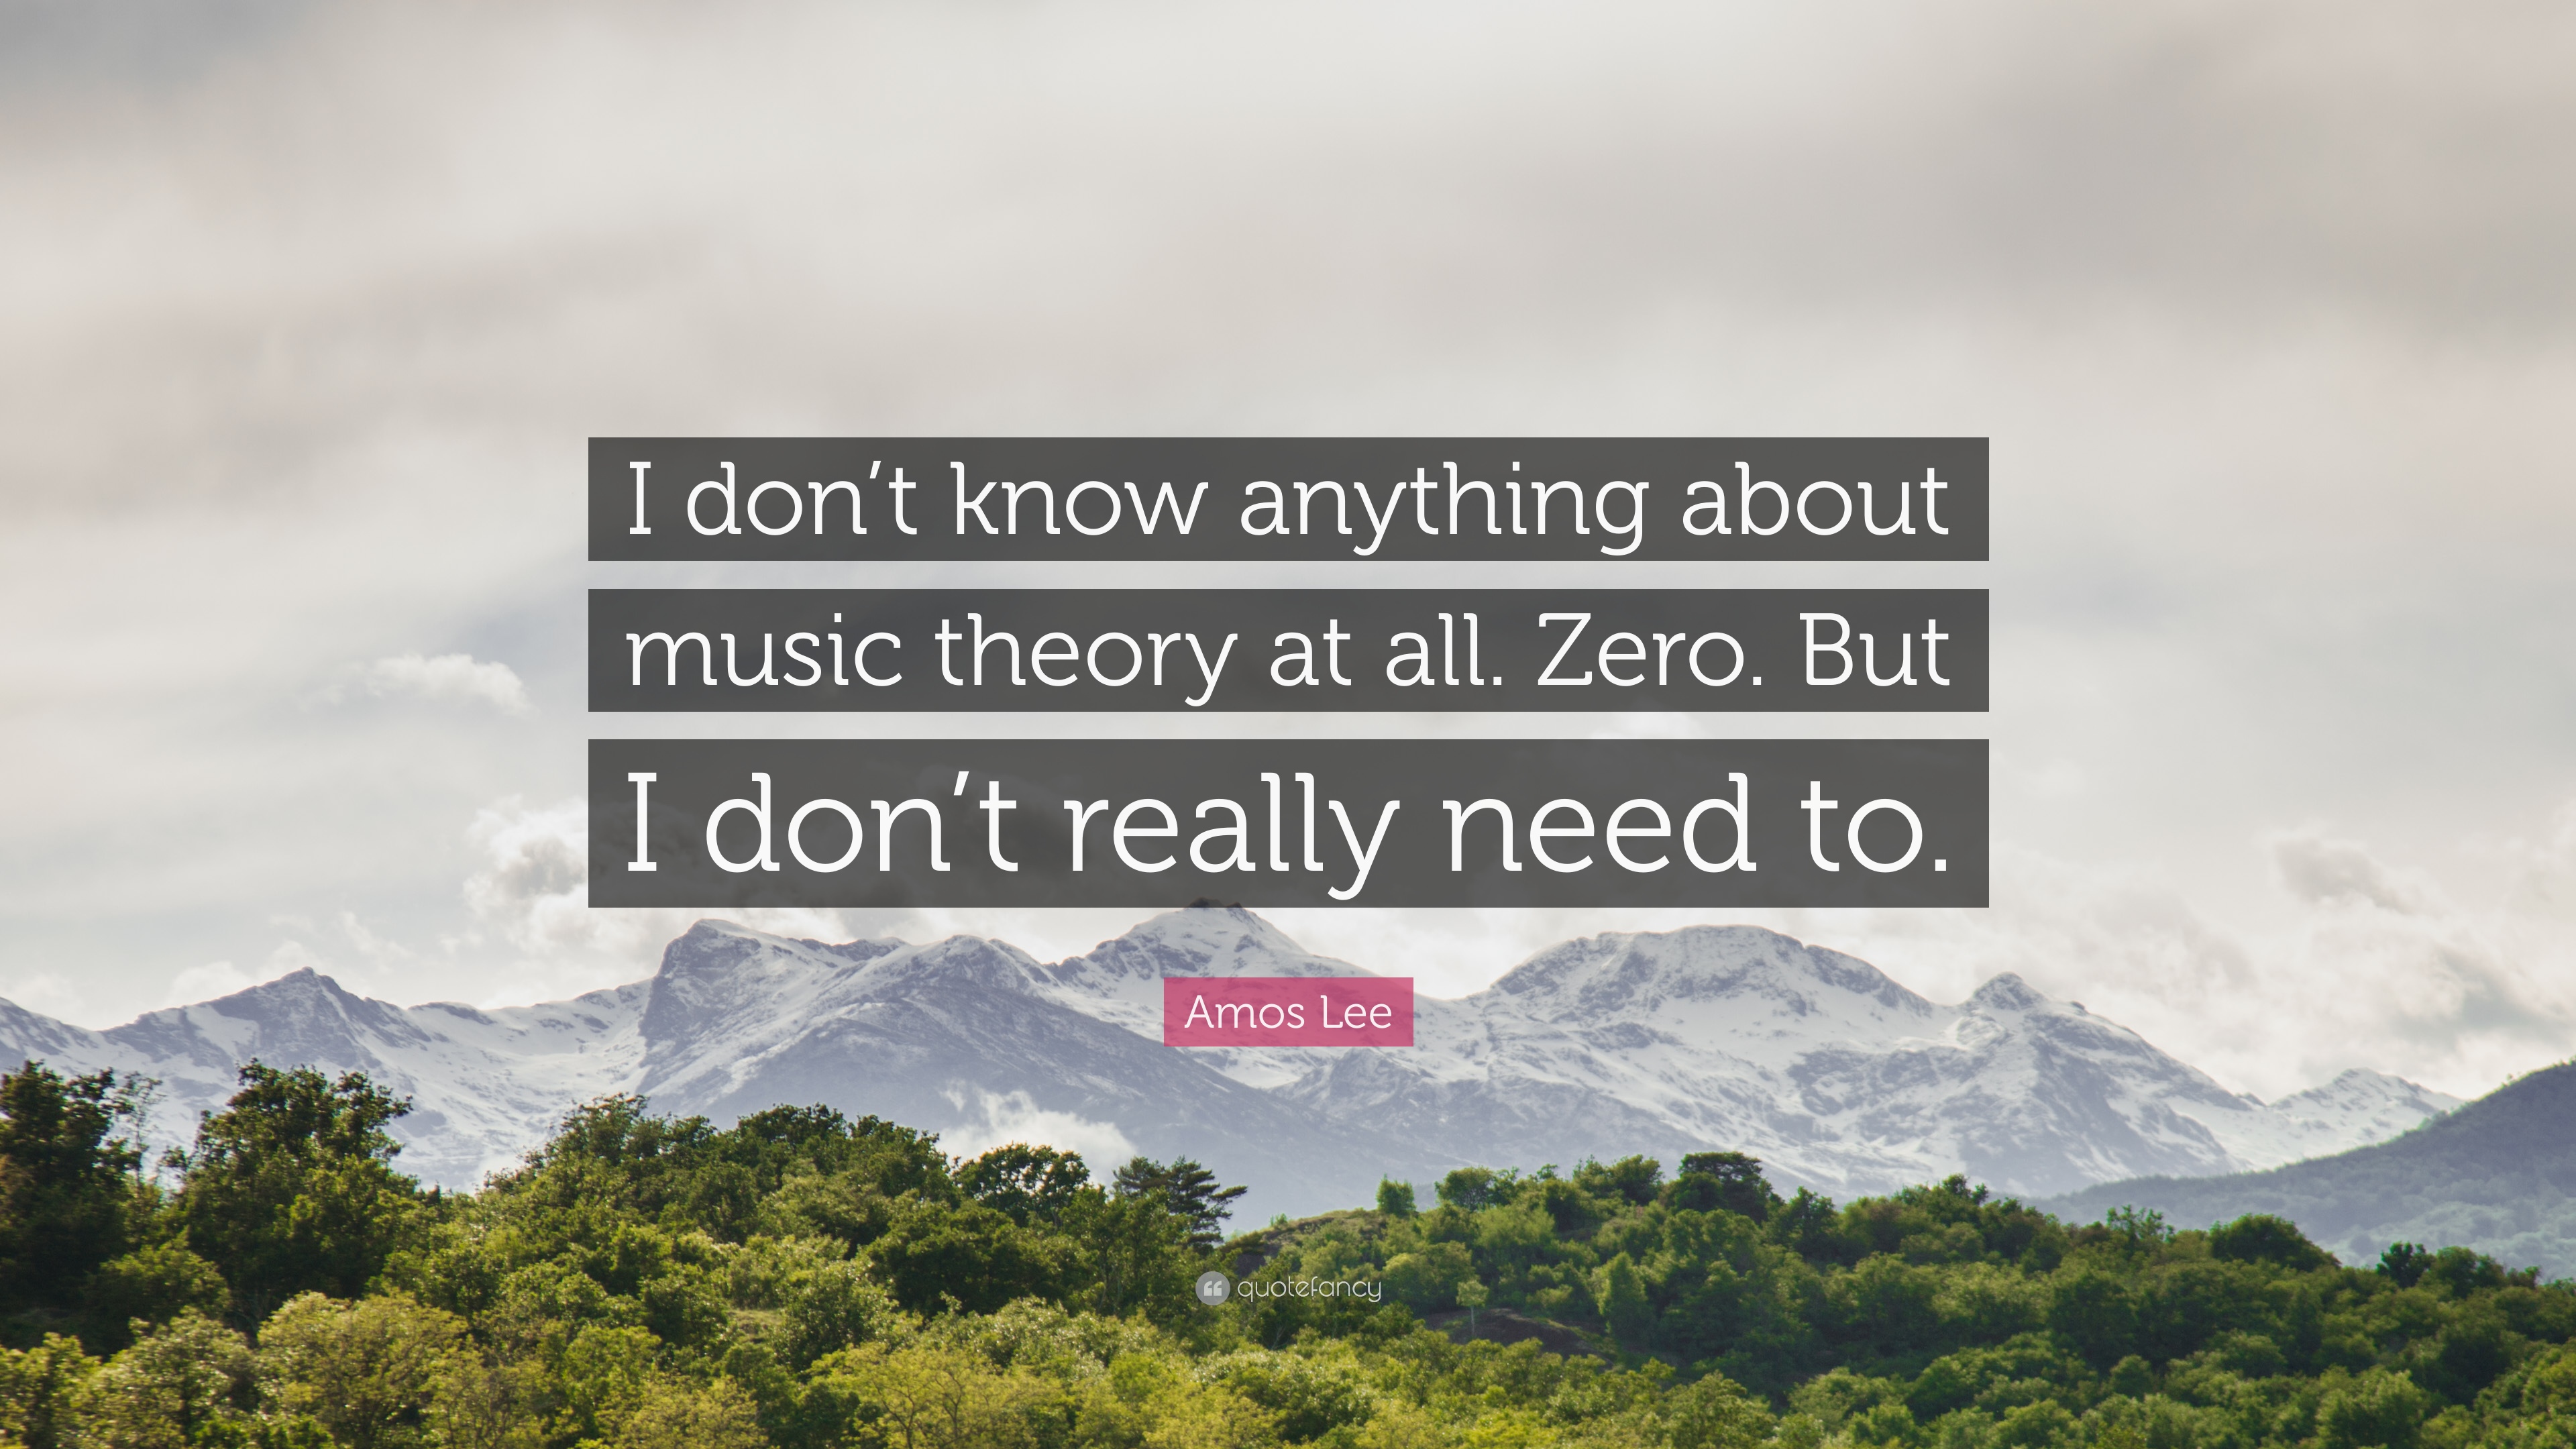 Amos Lee Quote: “I don't know anything about music theory at all. Zero. But I